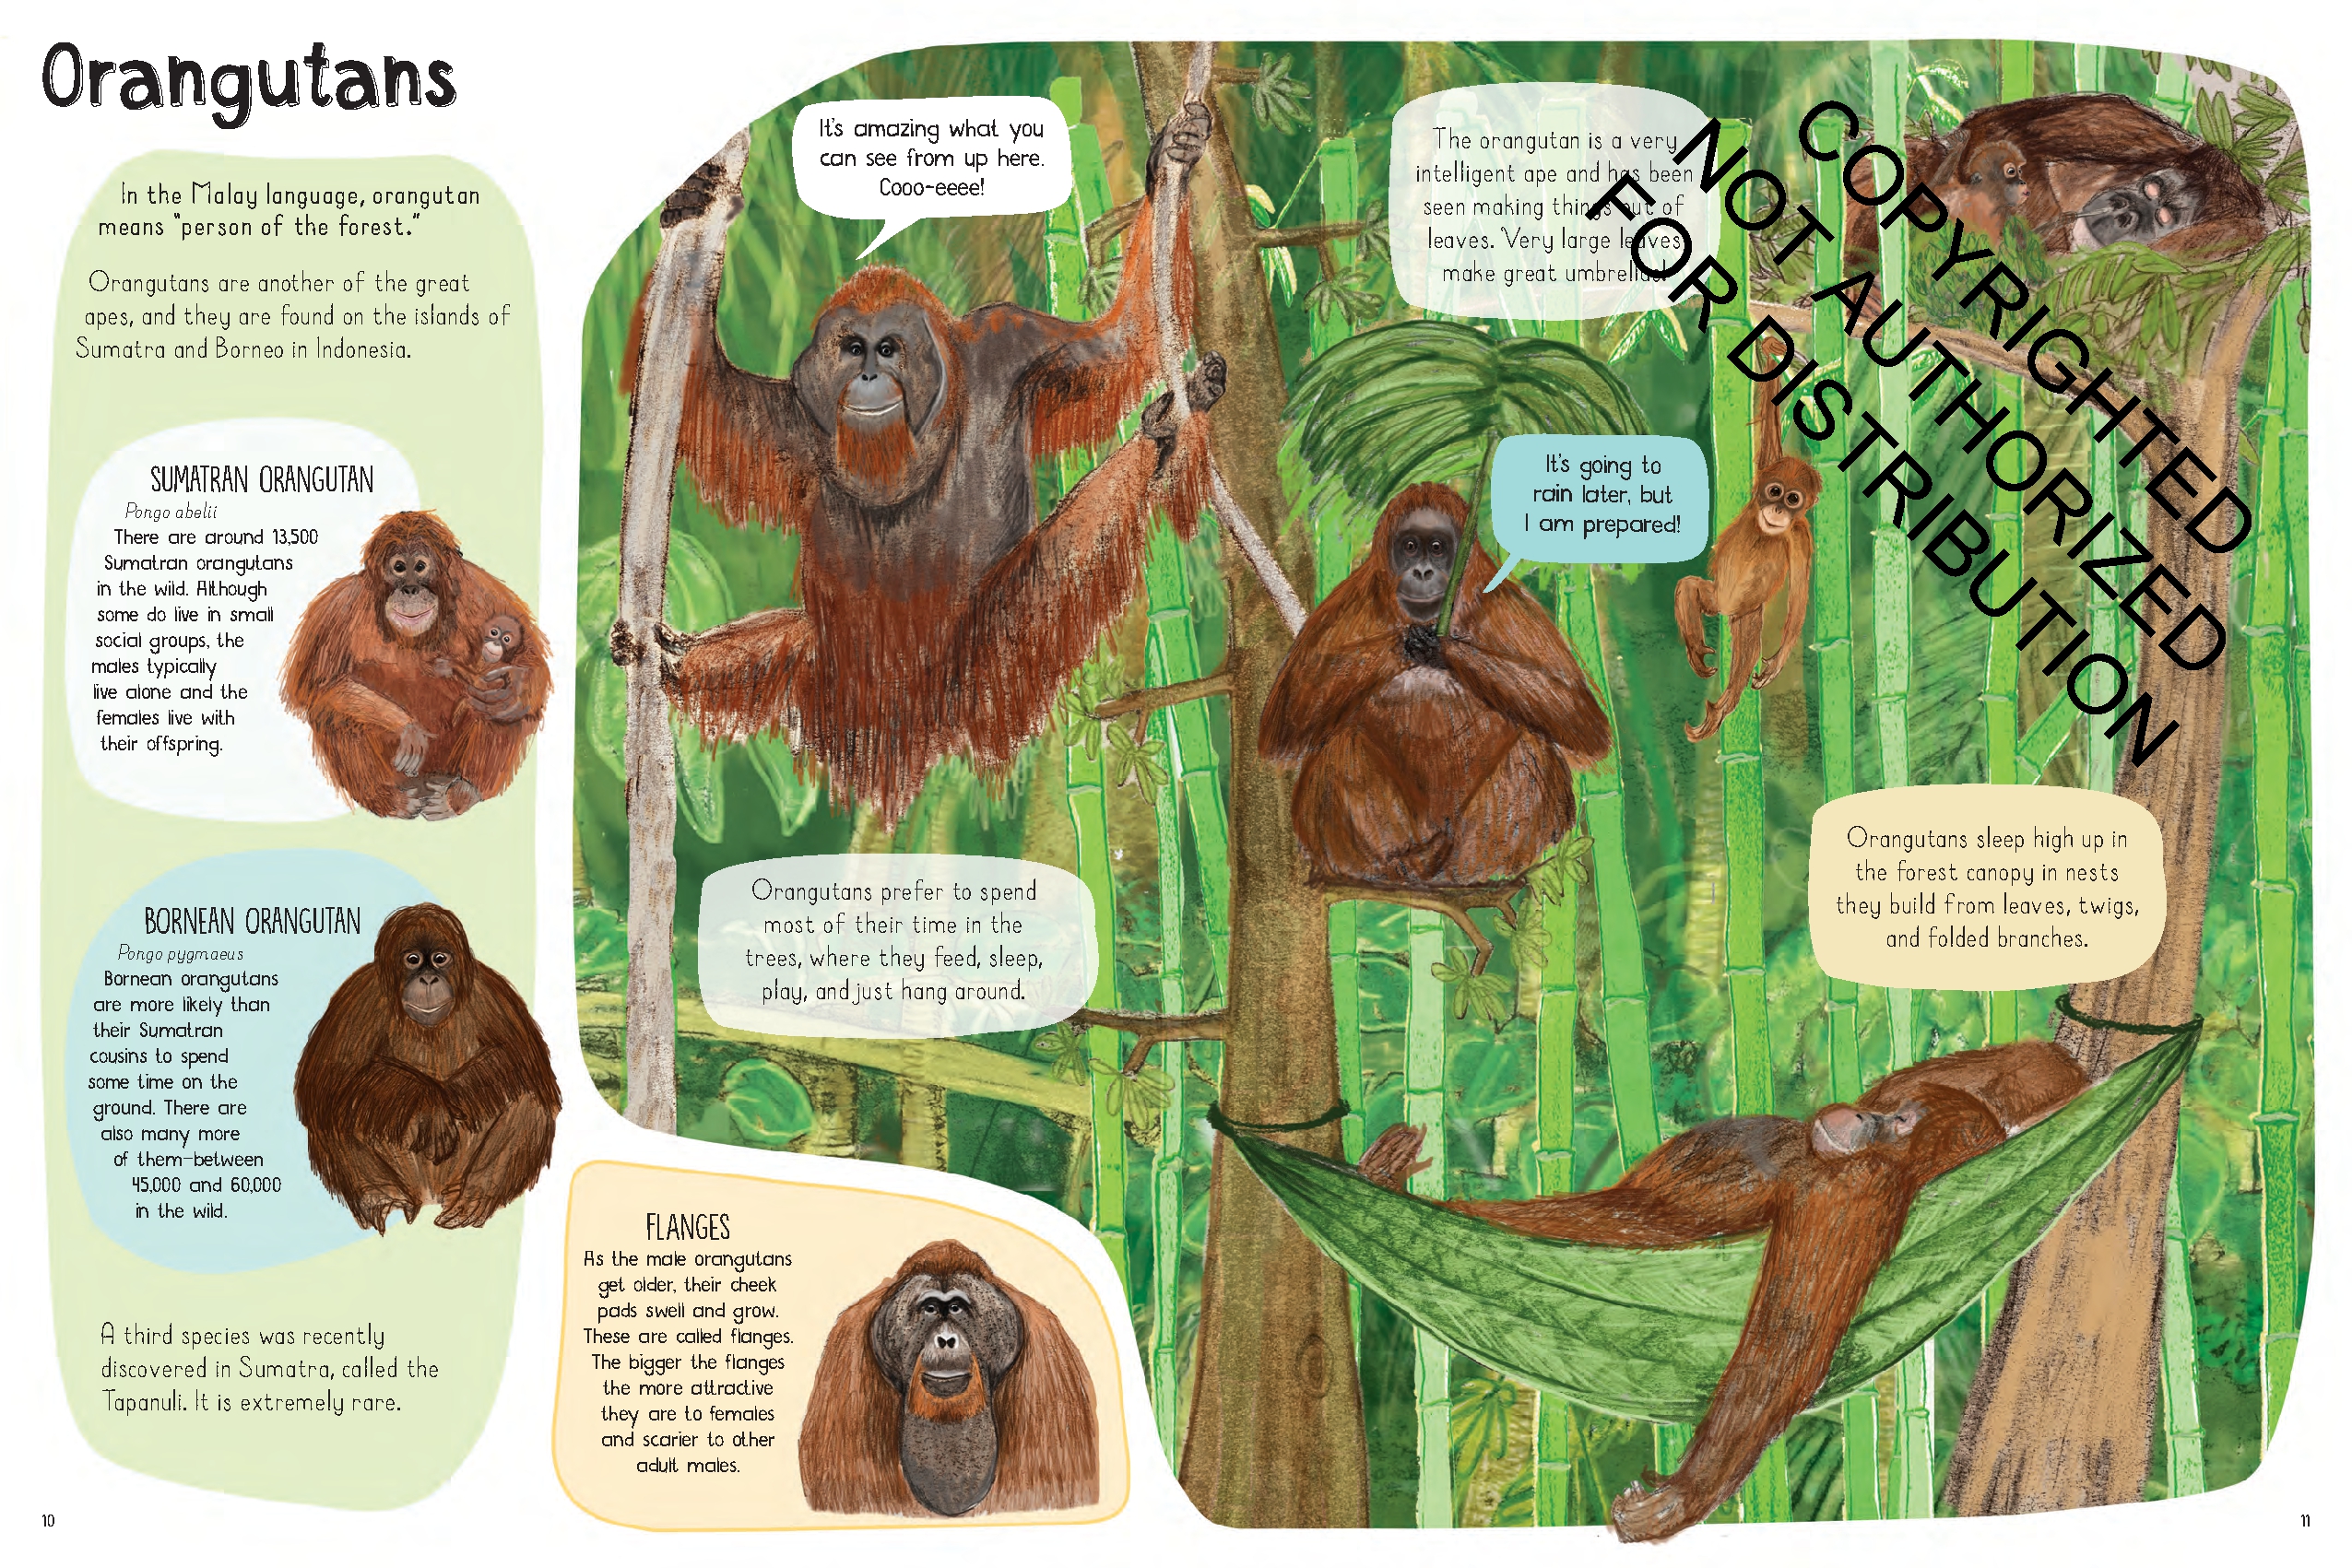 A Book of Monkeys (and other Primates)